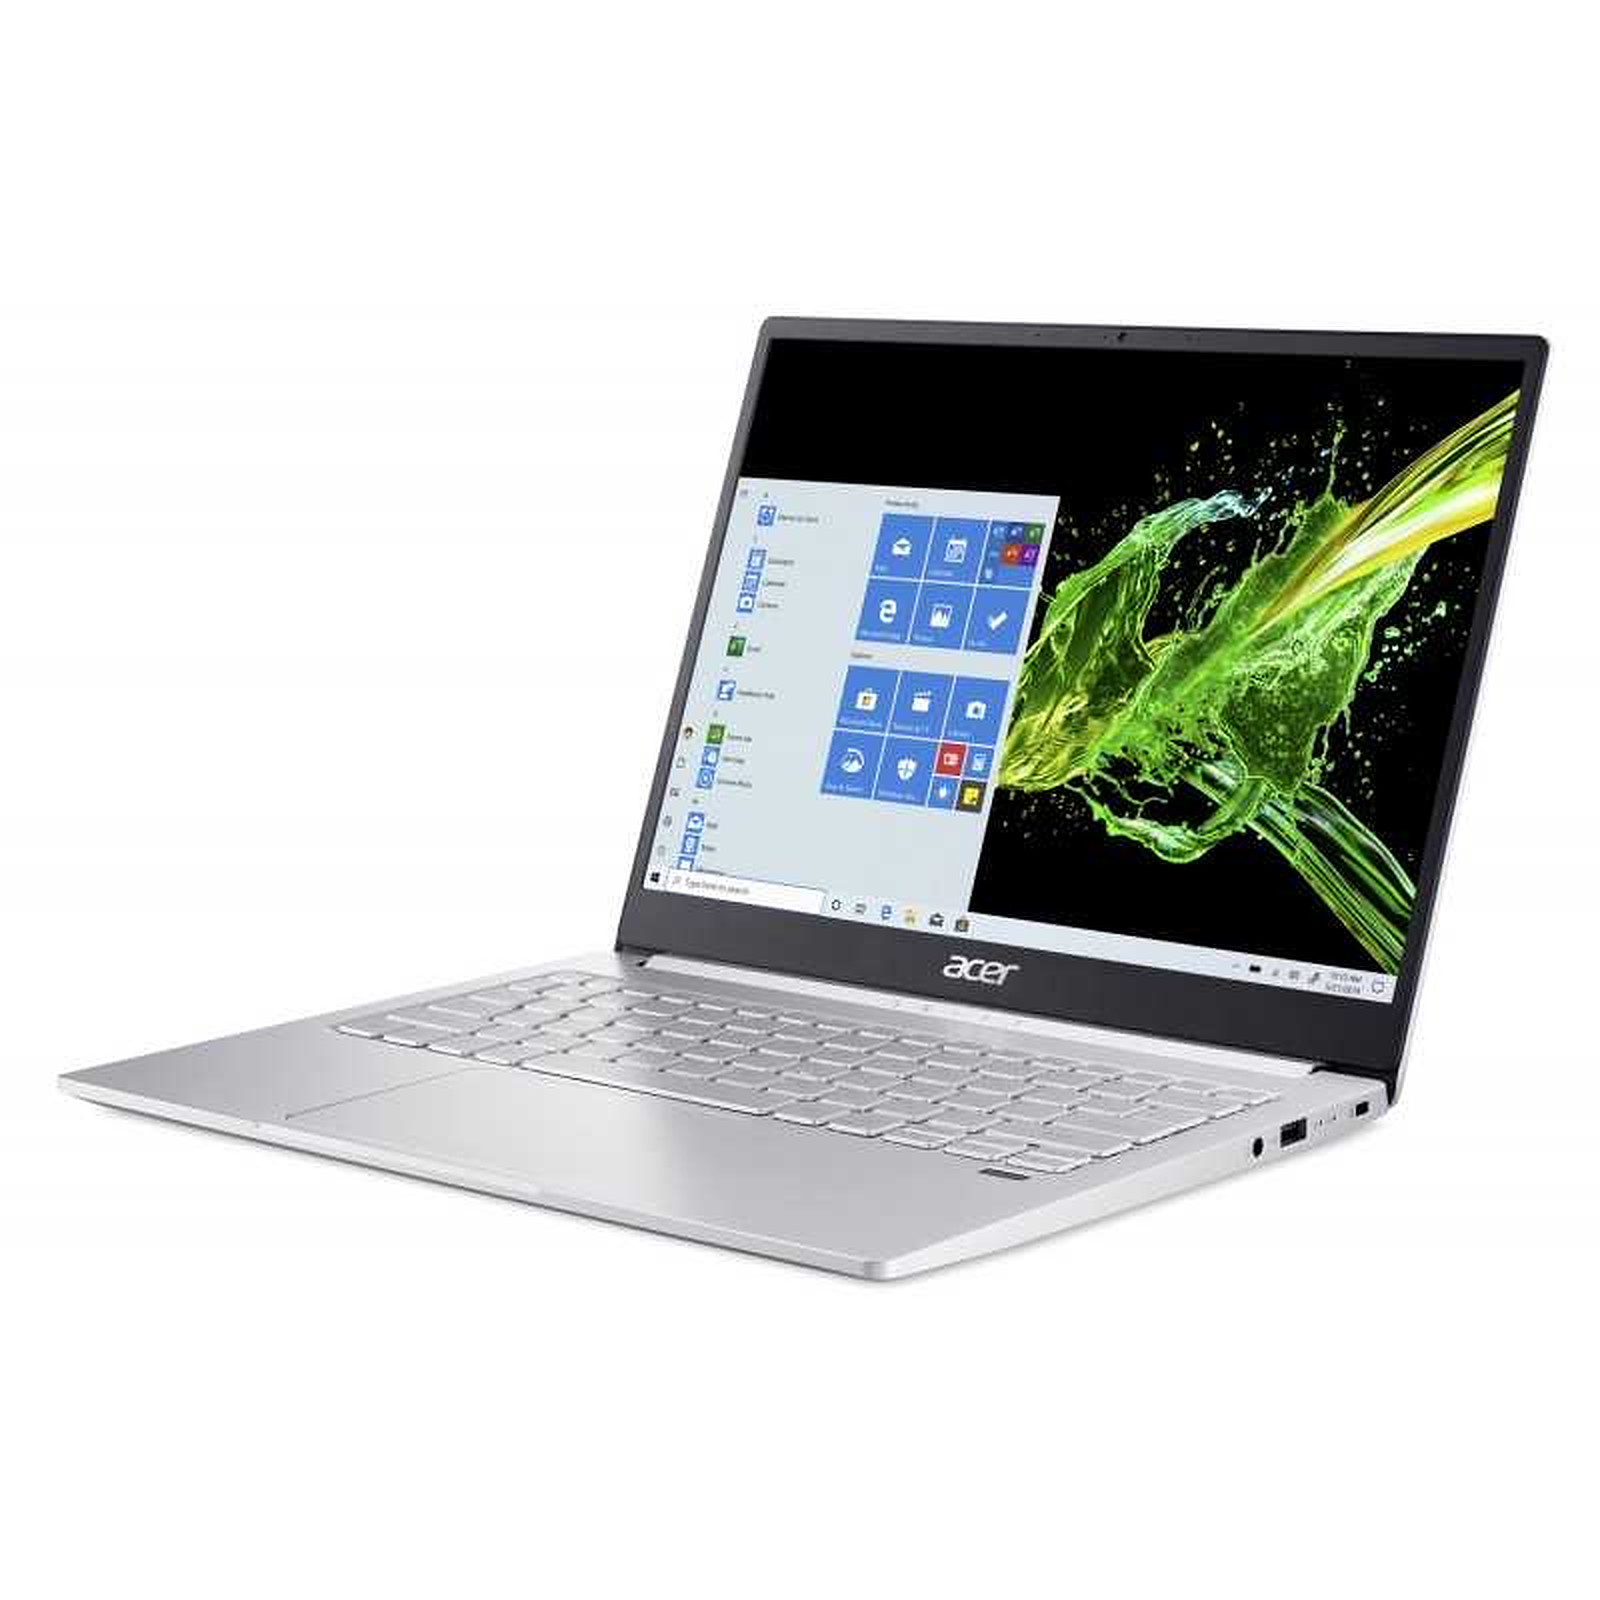 Acer Swift 3 SF313-52-50LU (NX.HQXEF.006) · Reconditionne - PC portable reconditionne Acer